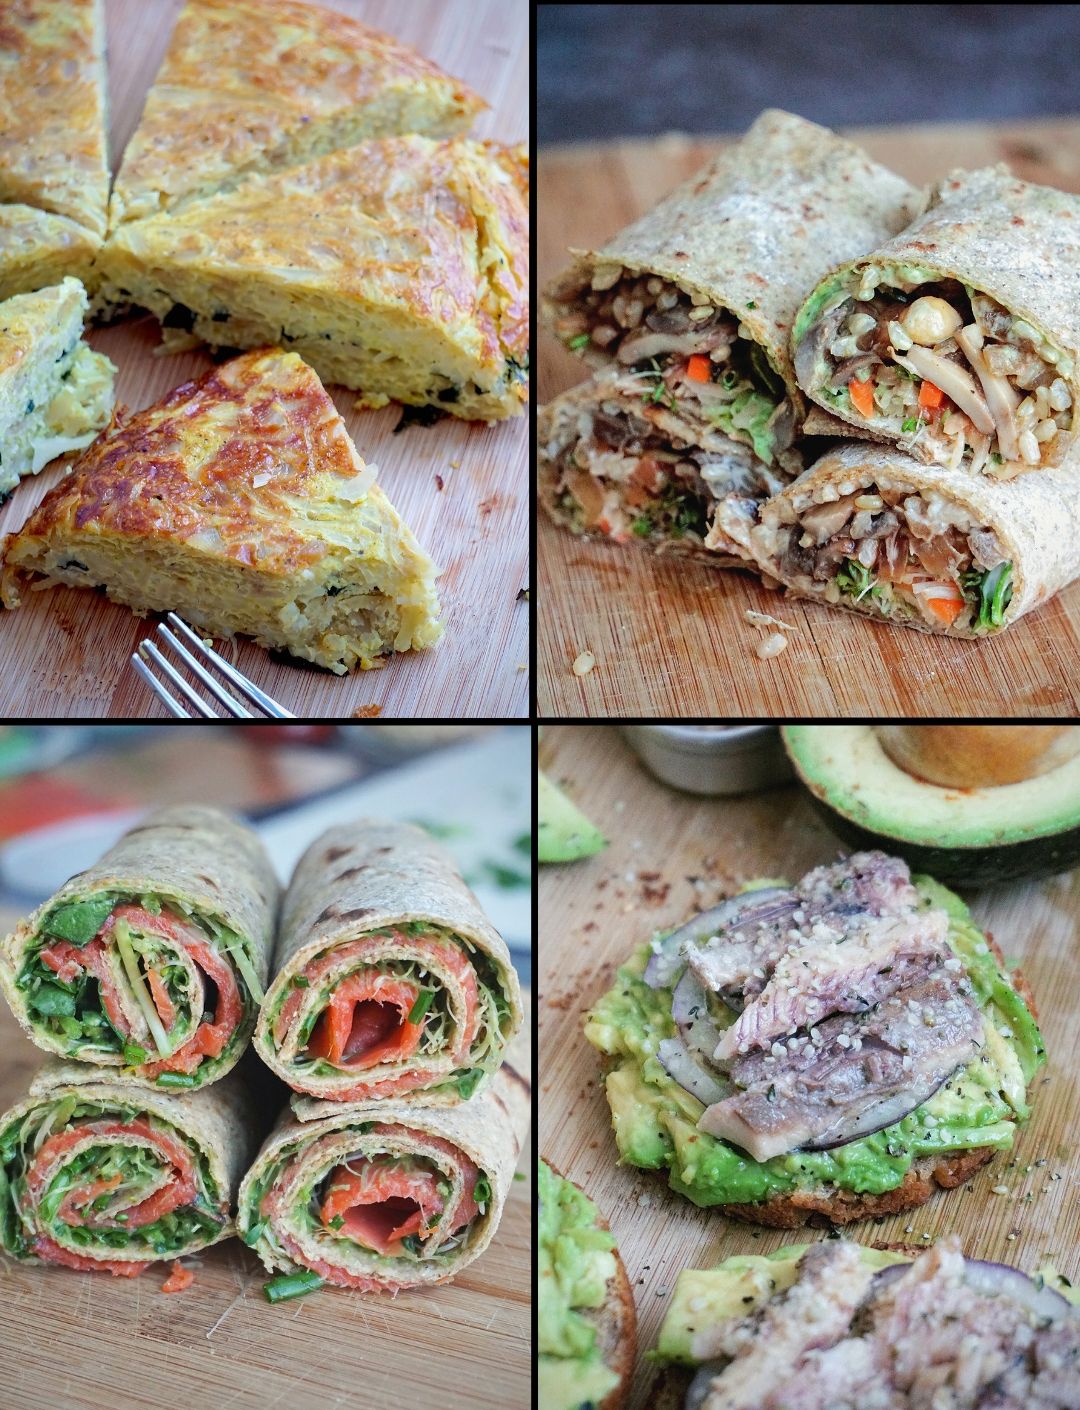 Gluten And Dairy Free Savory Breakfast Ideas by healthytasteoflife